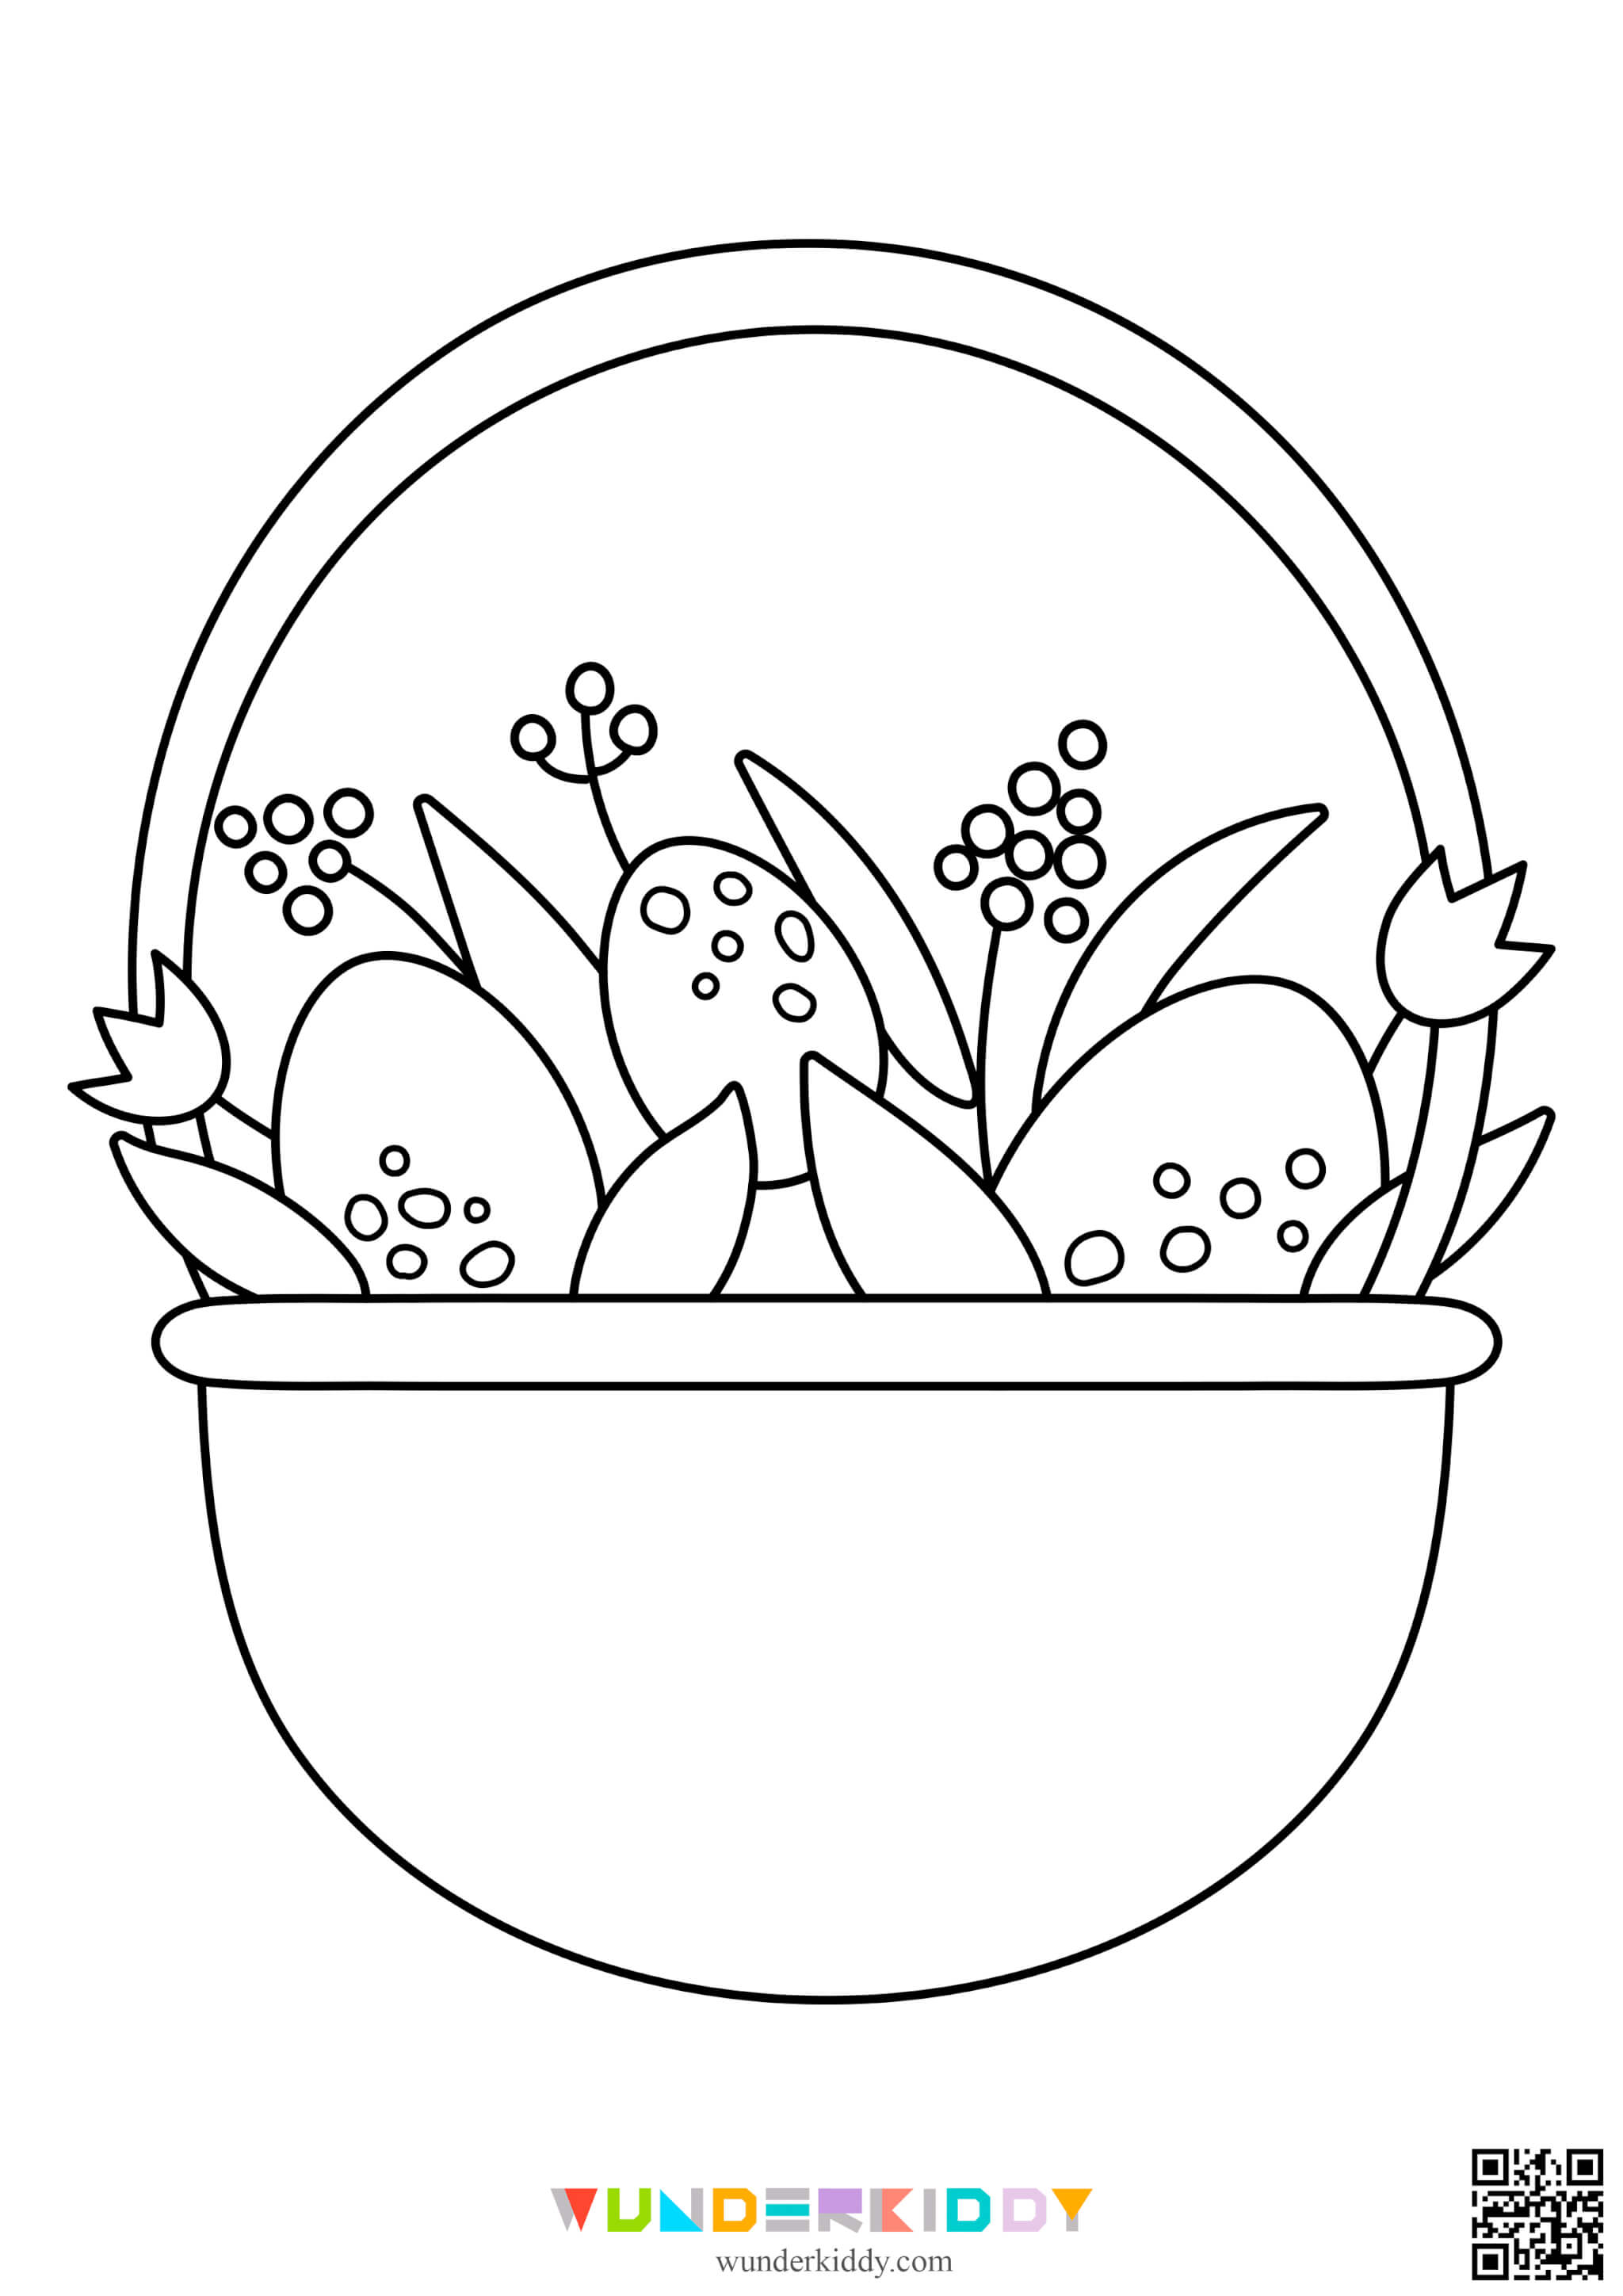 Easter Eggs Coloring Pages - Image 9